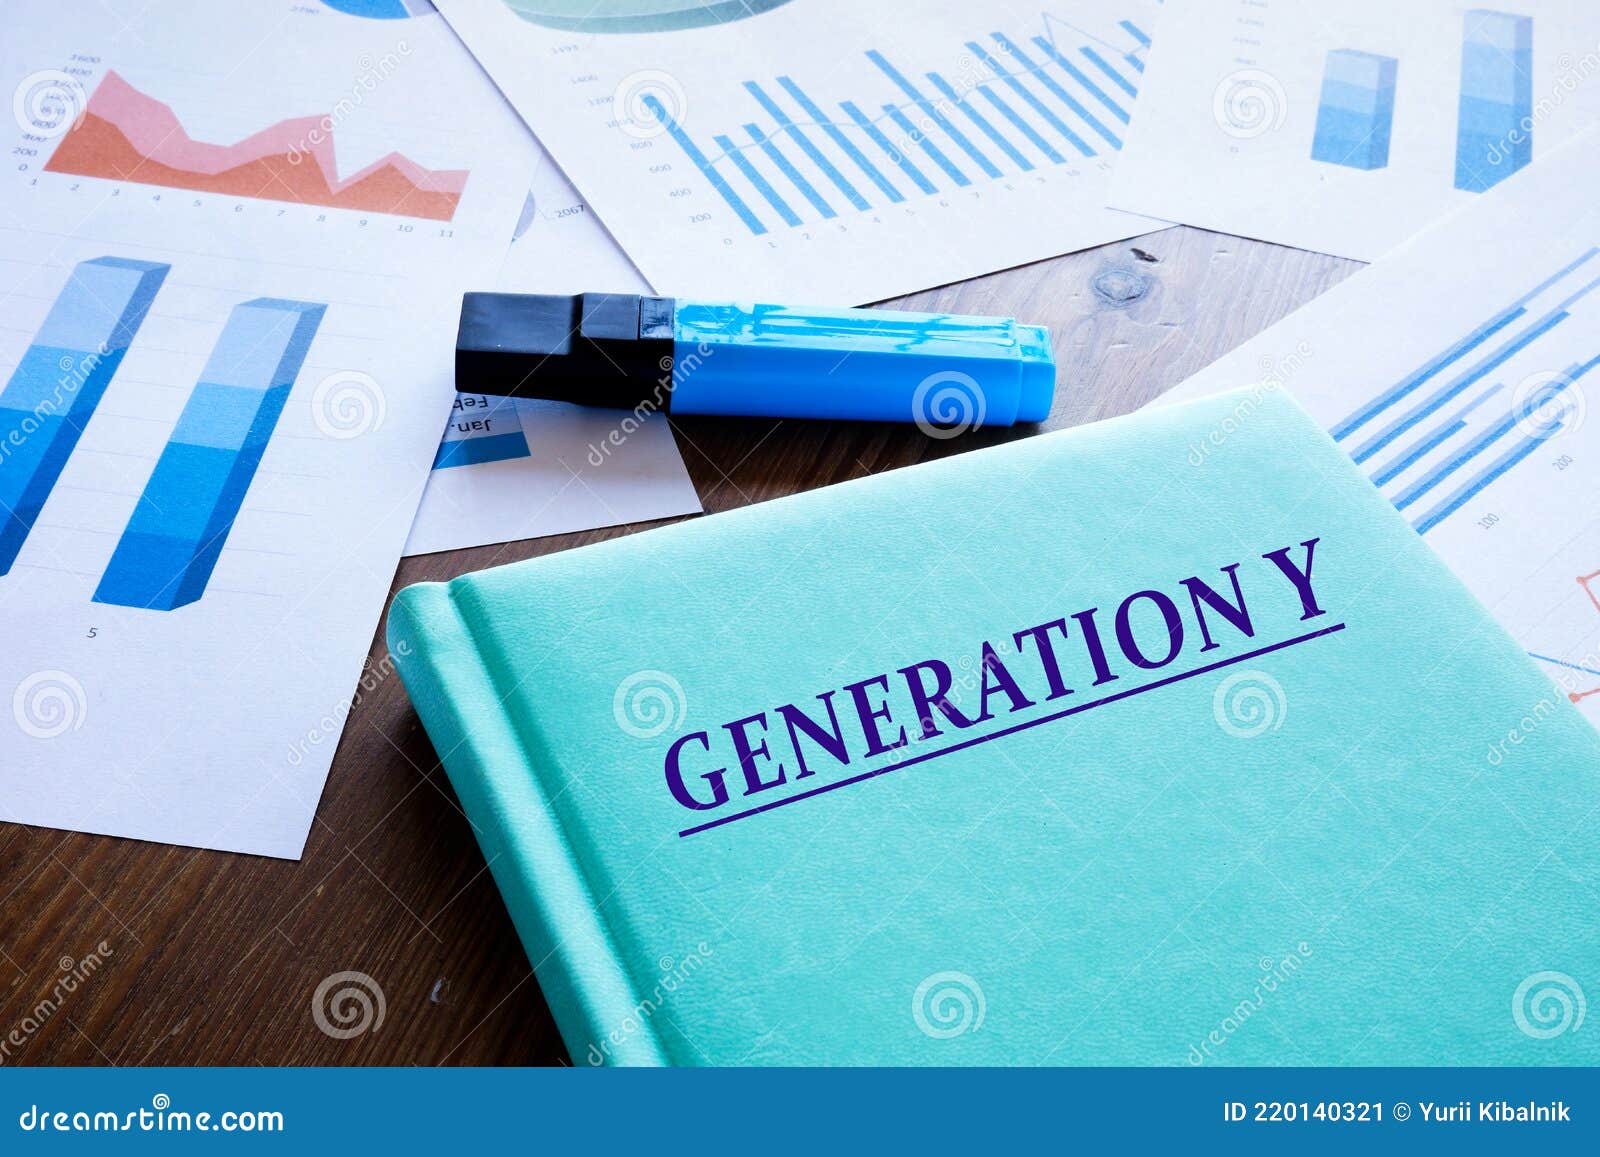 Financial Concept Meaning GENERATION Y with Phrase the Stock Image - Image of 220140321